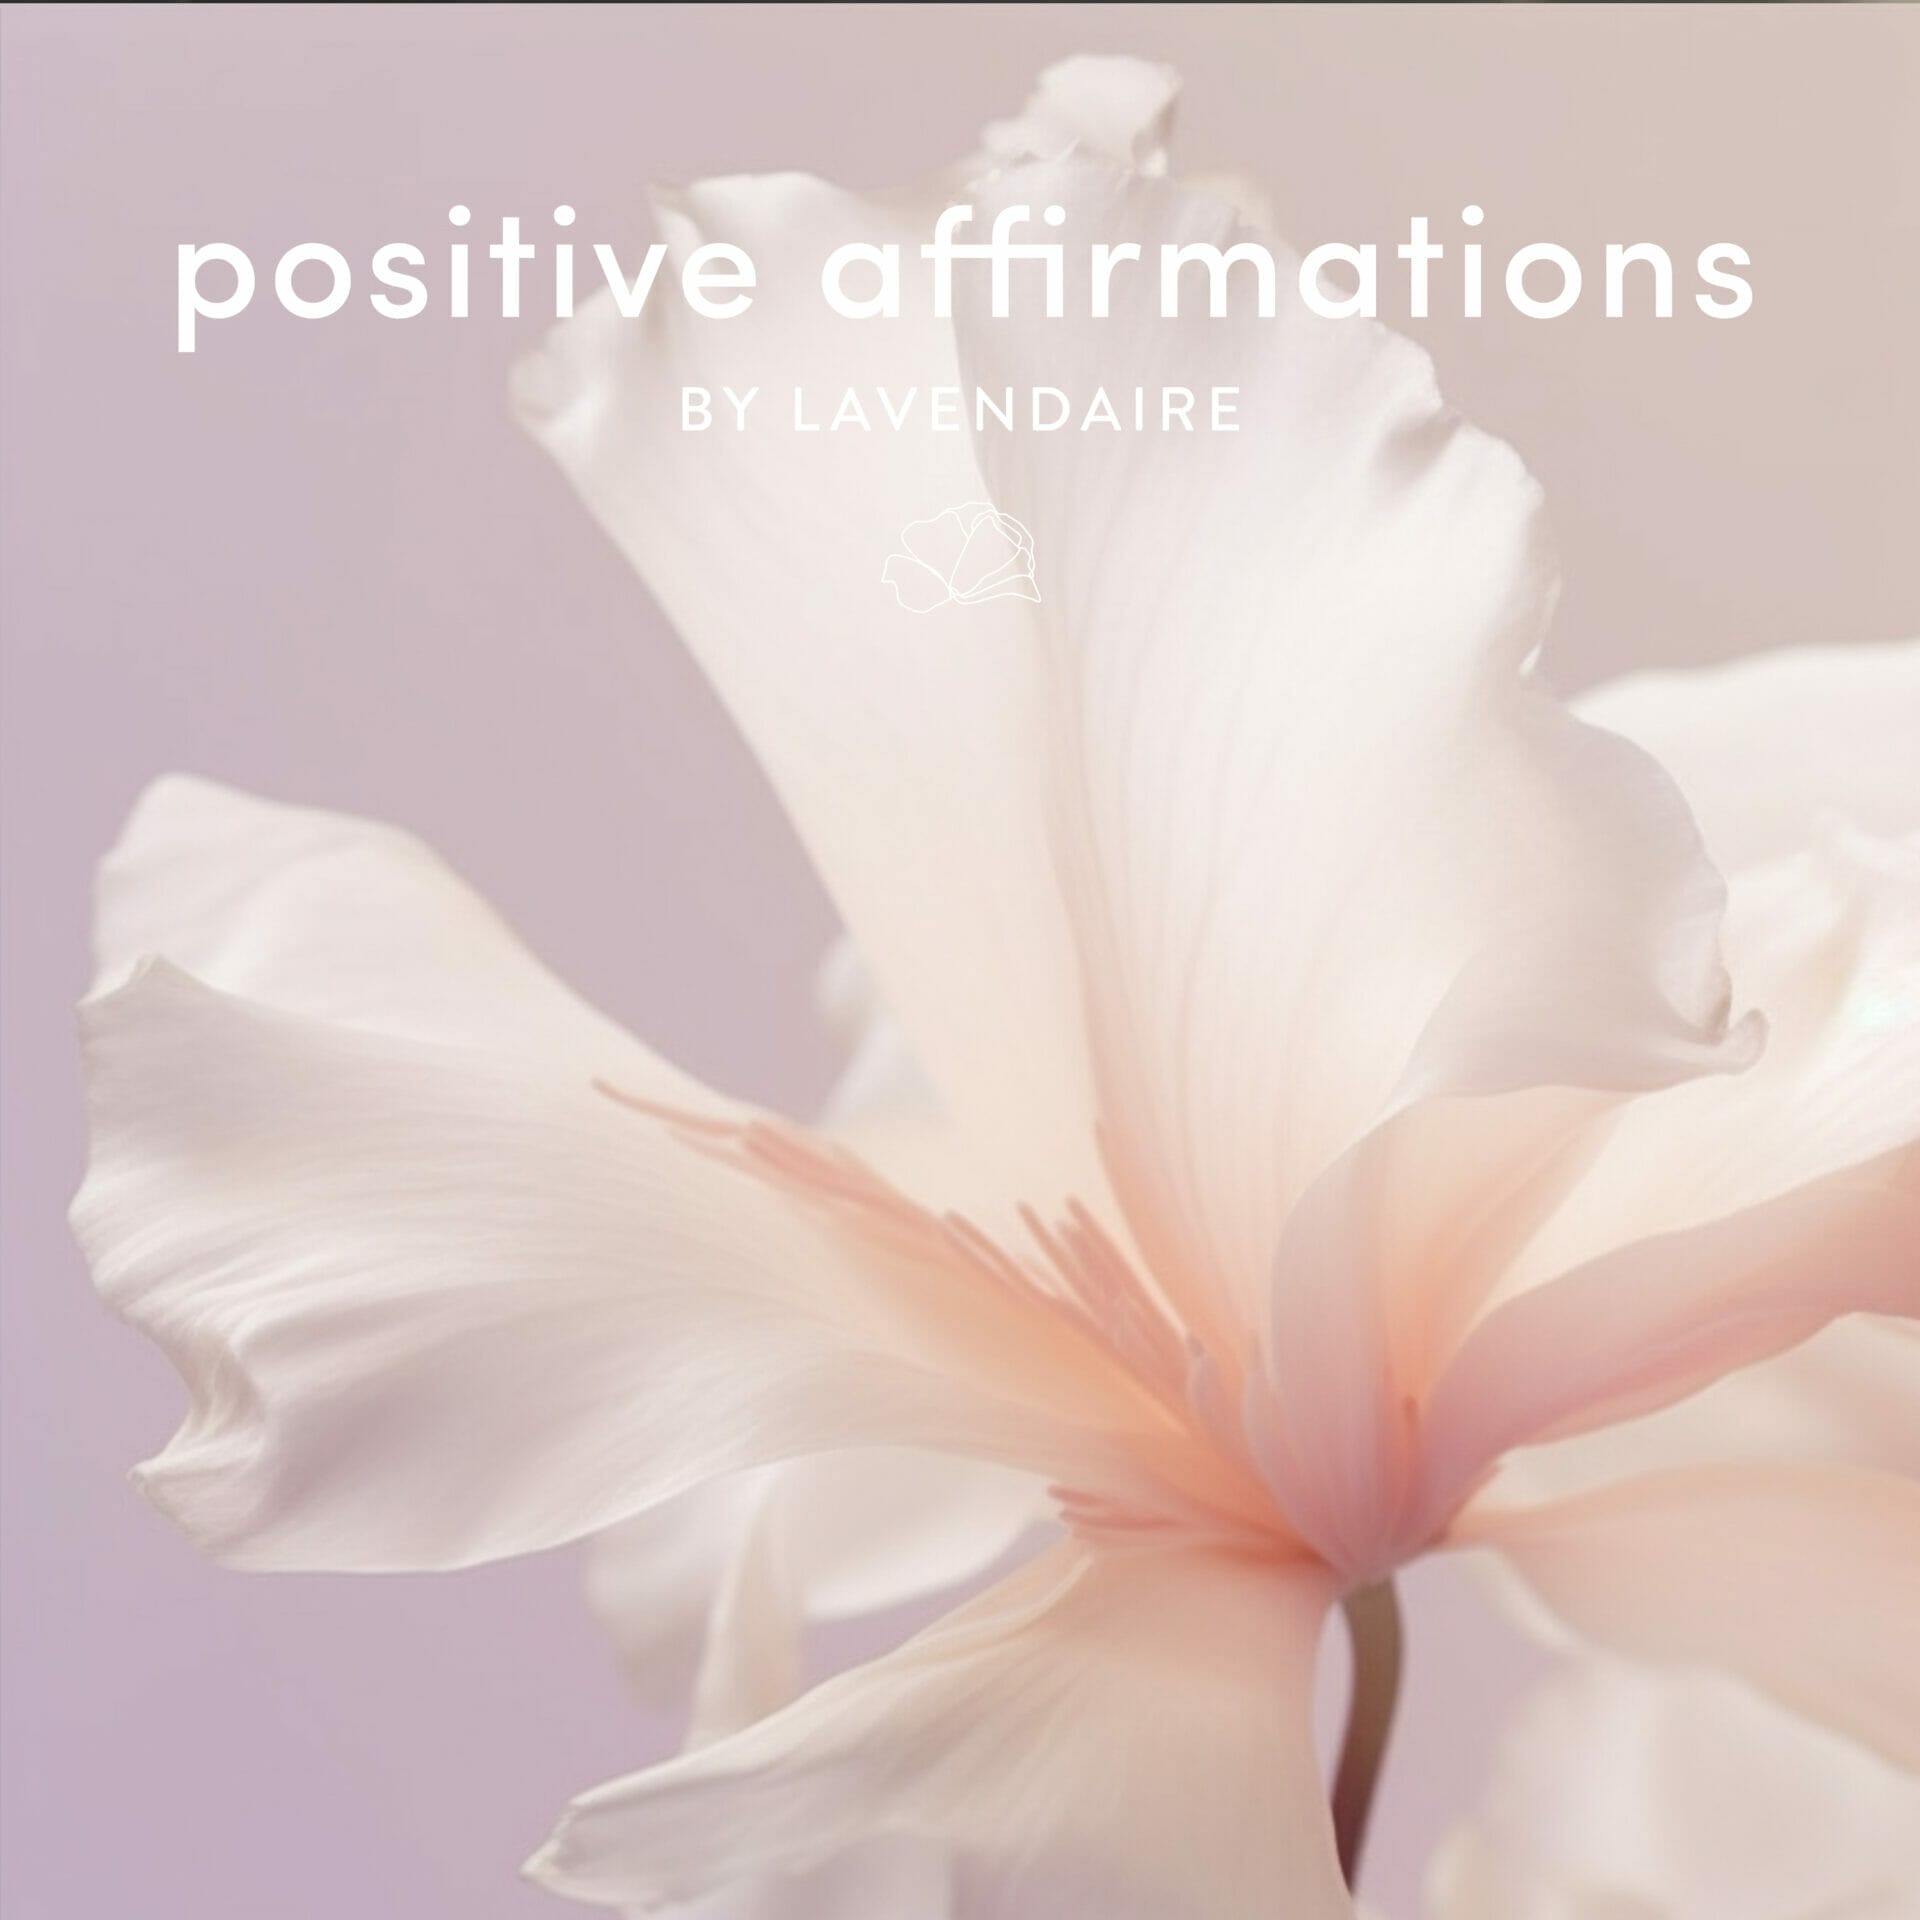 positive affirmations to change your life